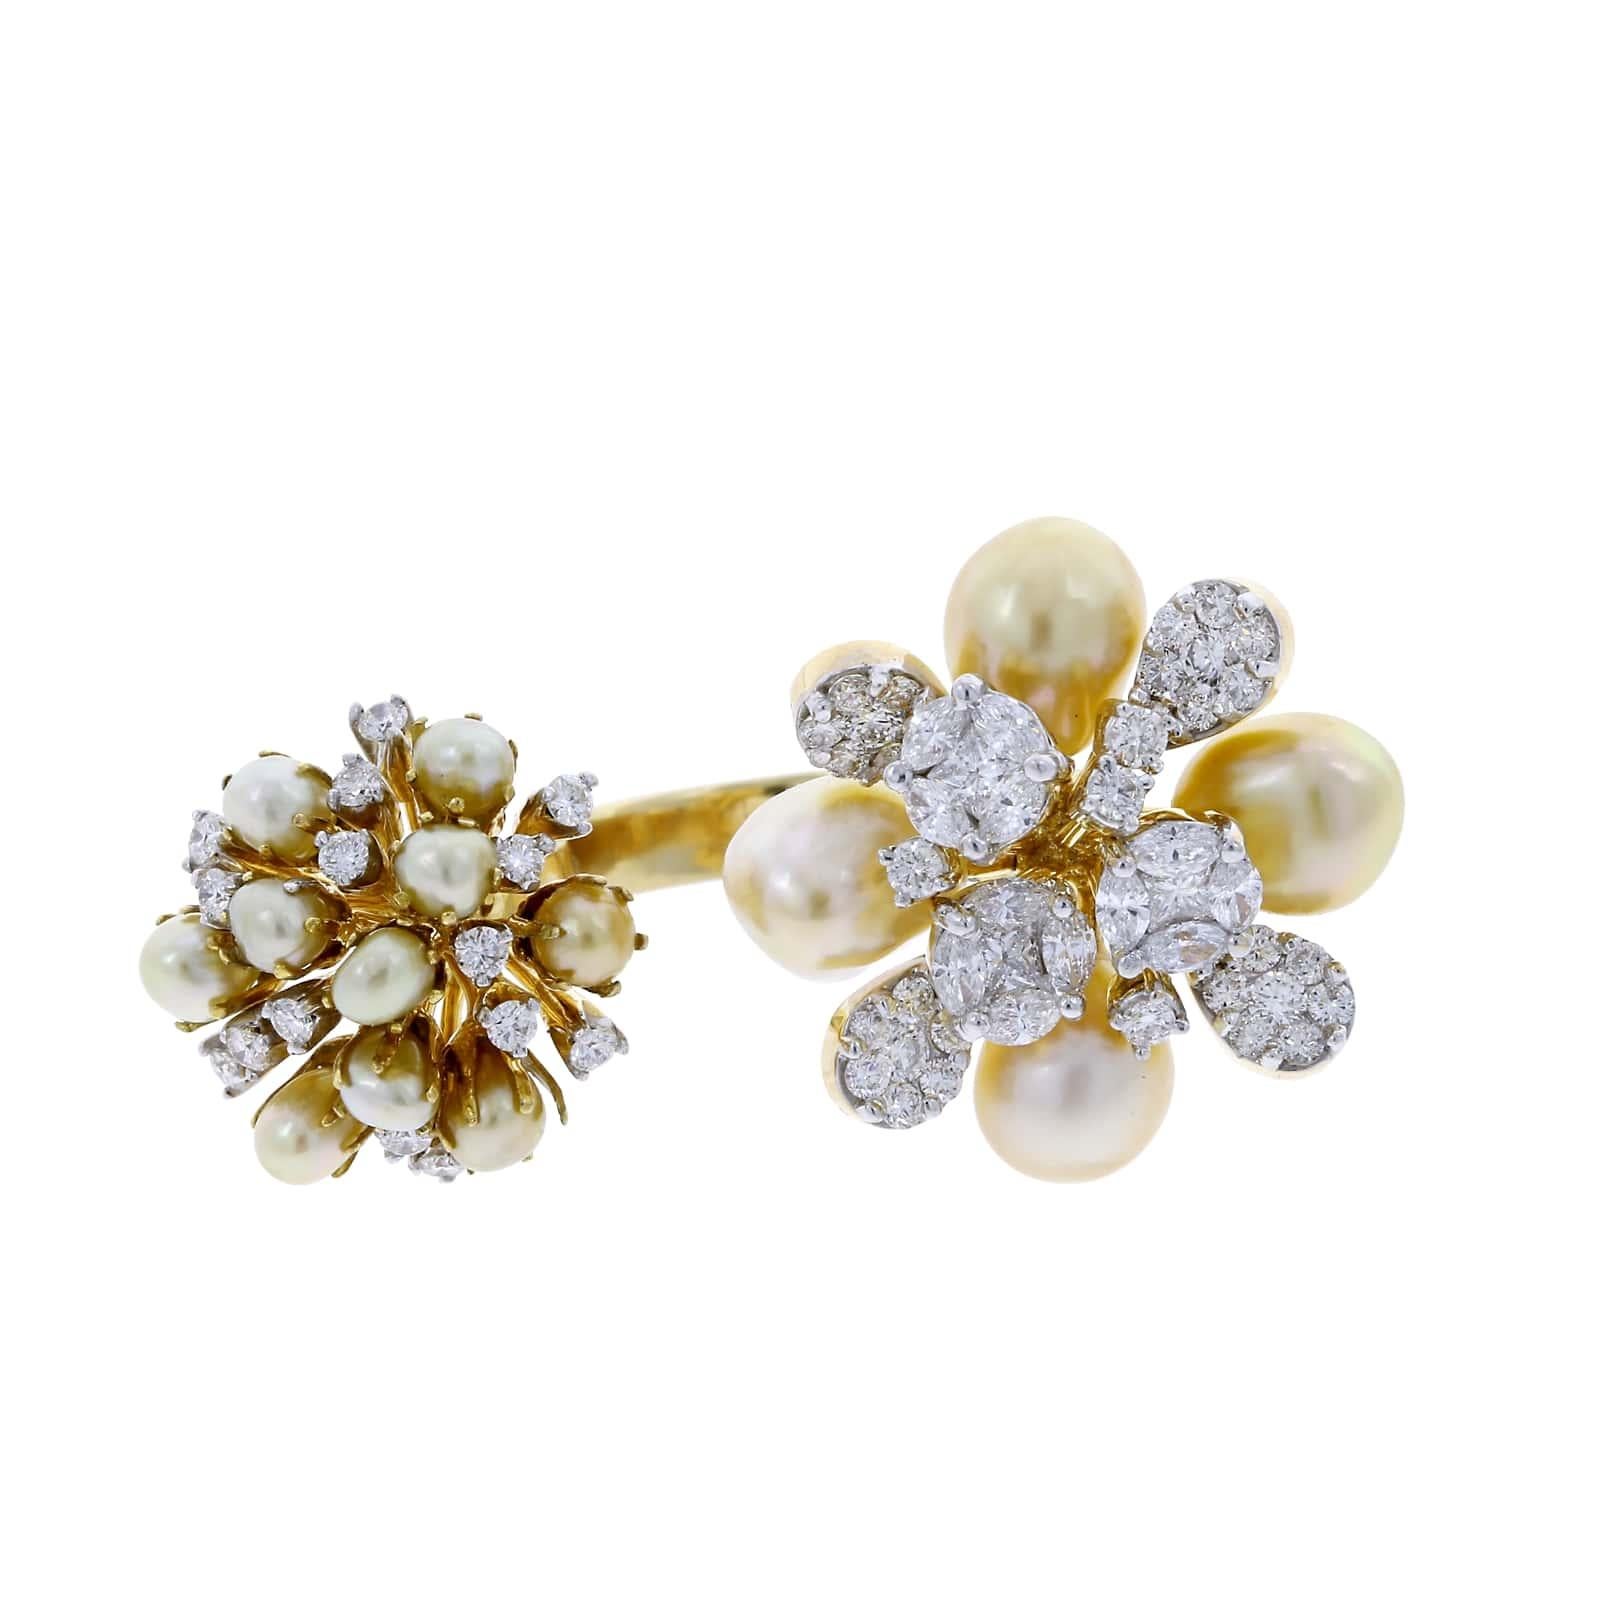 A stylish and decorative open ring with two clusters of pearls, accented with mixed cut diamonds. Princess Diamonds (0.34 cts), Marquise Diamonds (0.81 cts), Round Diamonds (1.44 cts), and Pearls (17.50 cts). 18K Gold.